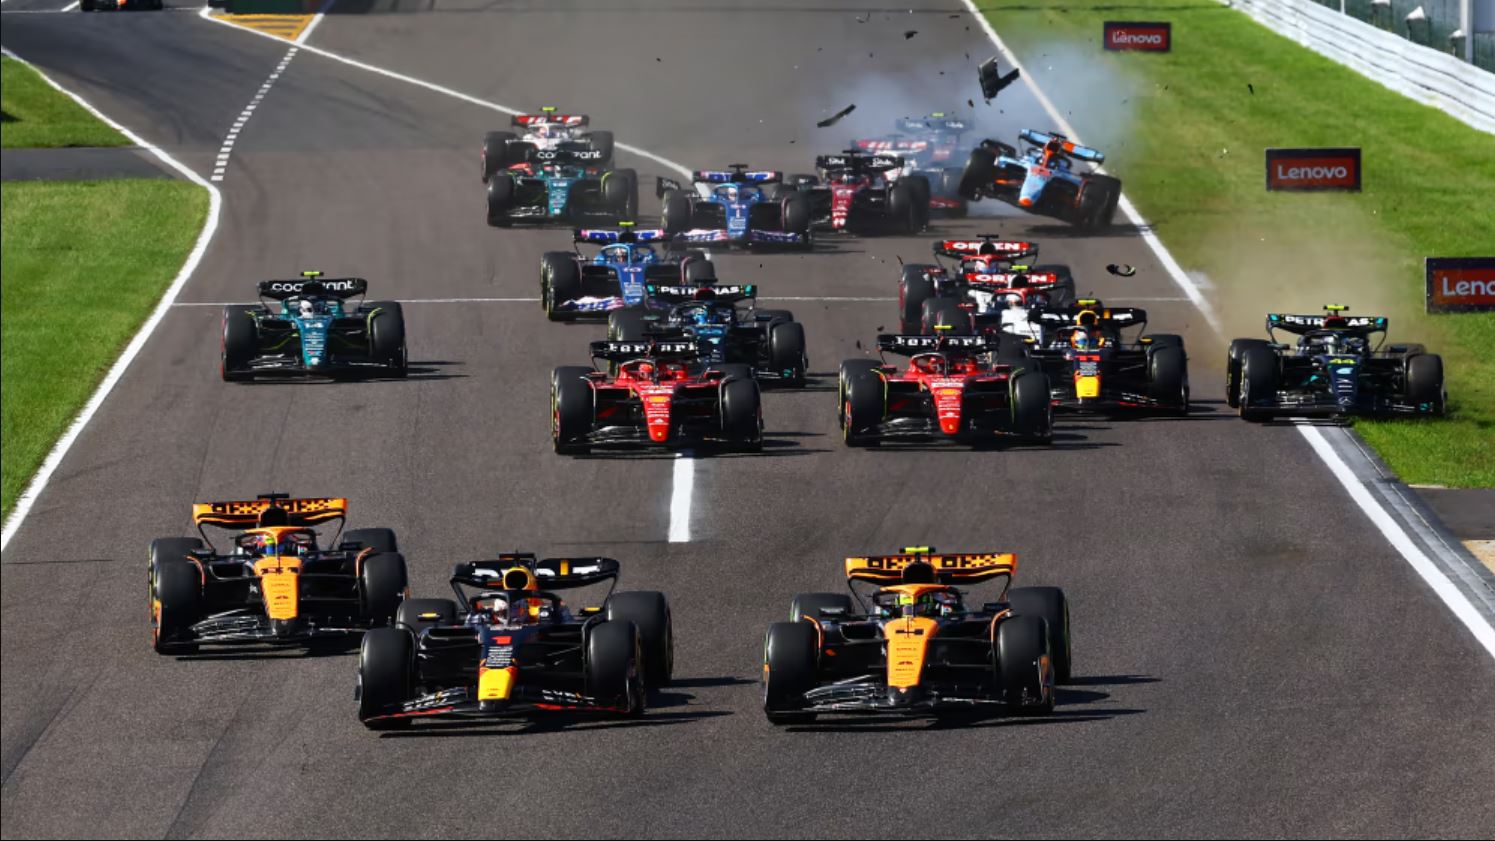 It was a dramatic start to the race as several drivers banged wheels and littered debris over the track - Image Credit Formula1.com